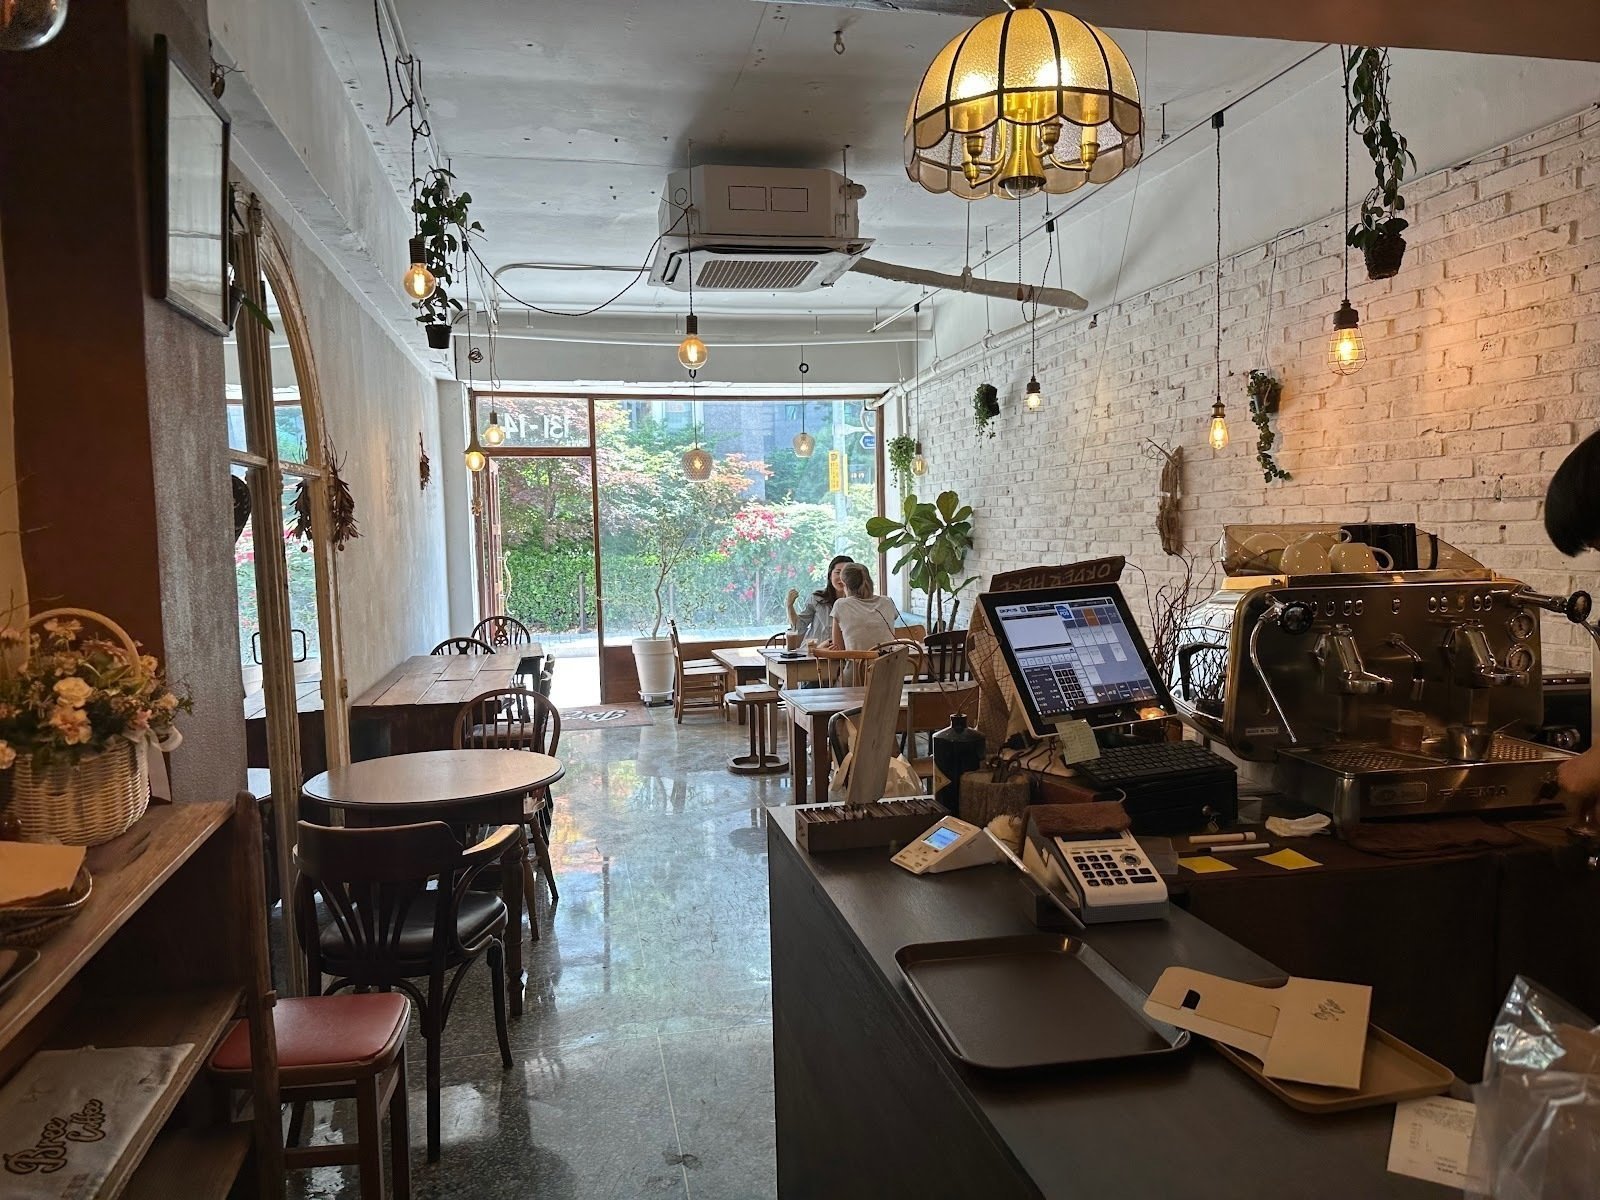 <span class="translation_missing" title="translation missing: en.meta.location_title, location_name: Bree Coffee, city: Seoul">Location Title</span>